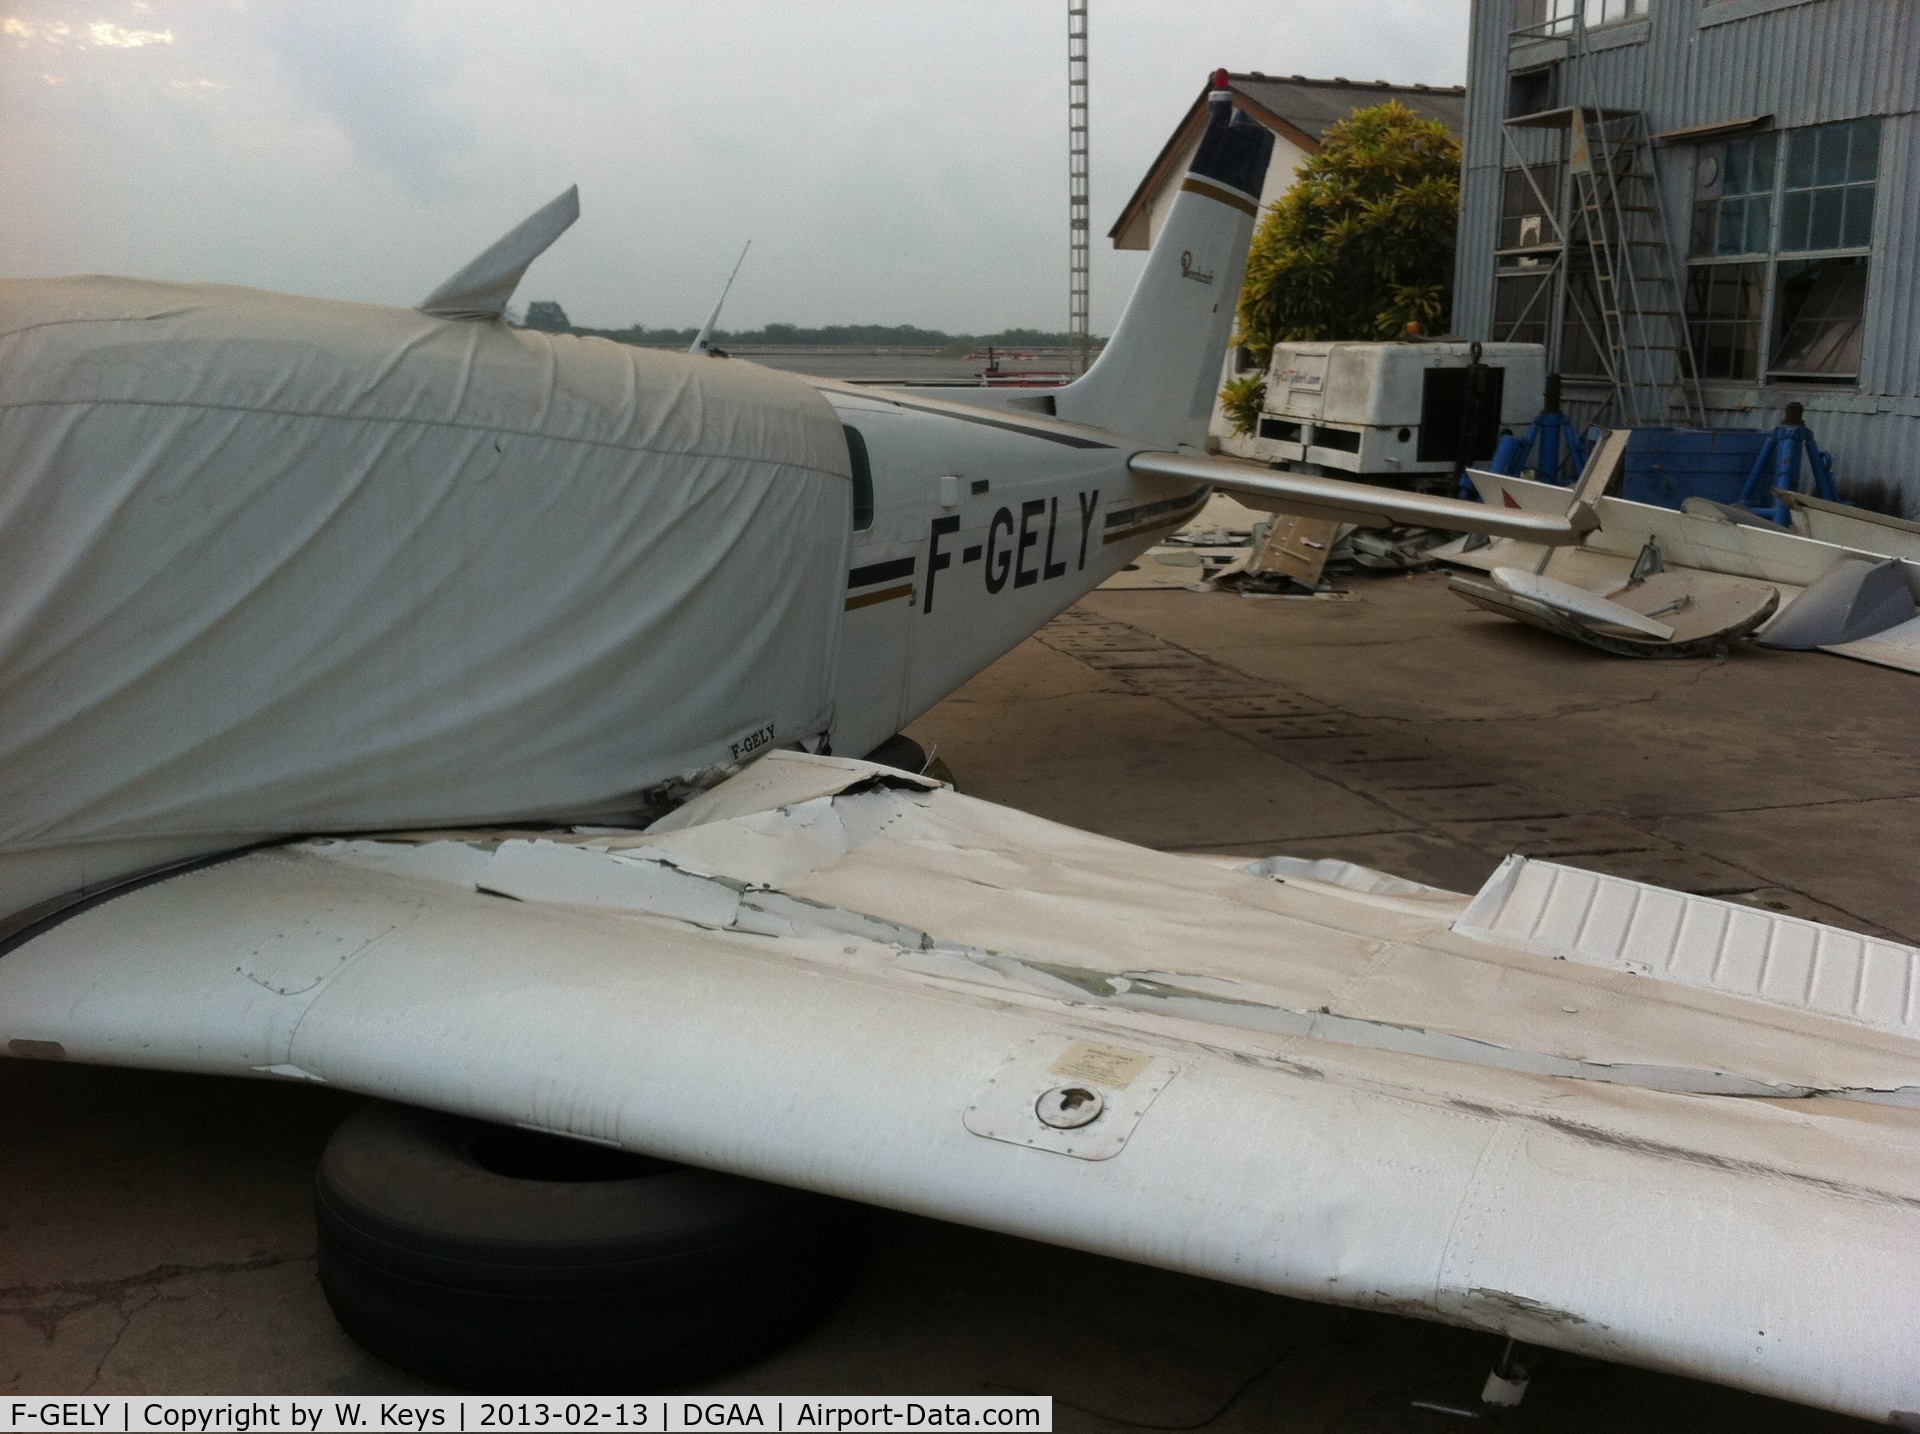 F-GELY, Beech A36 Bonanza 36 C/N E-458, Landing gear collapsed, right wing is mostly ripped off, propeller tips bent backwards.